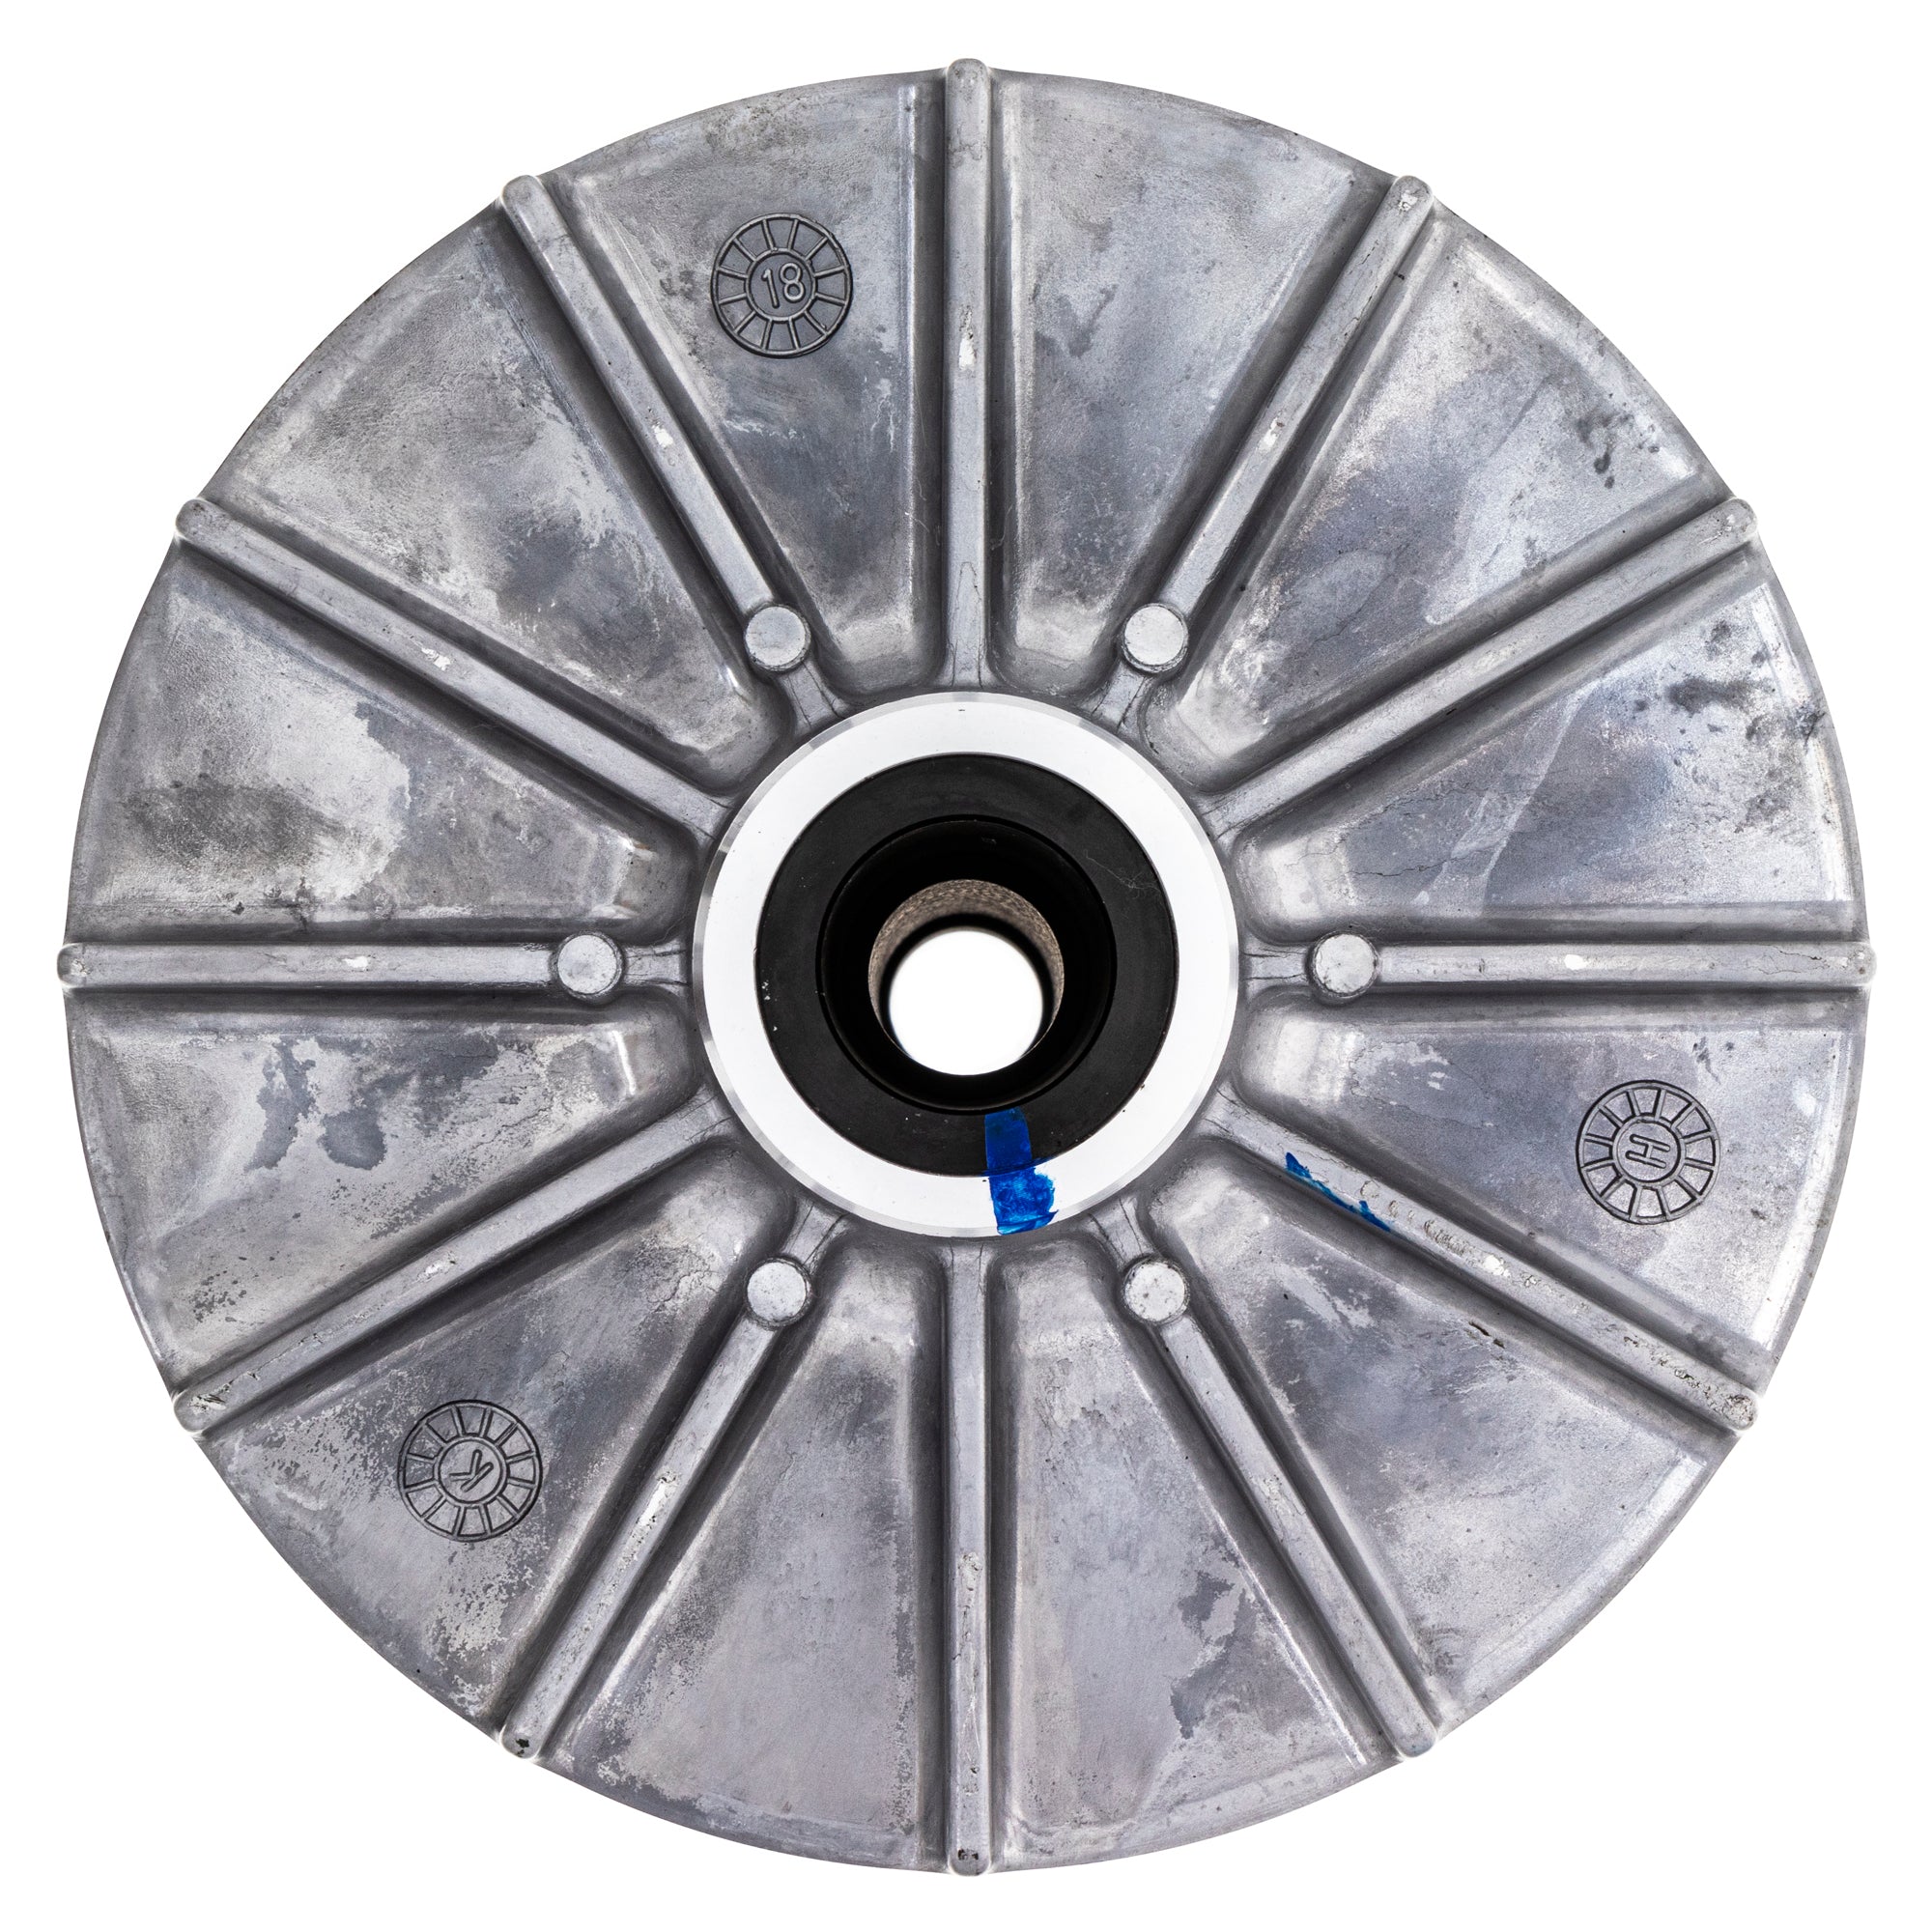 Primary Drive Clutch For Polaris 1322965